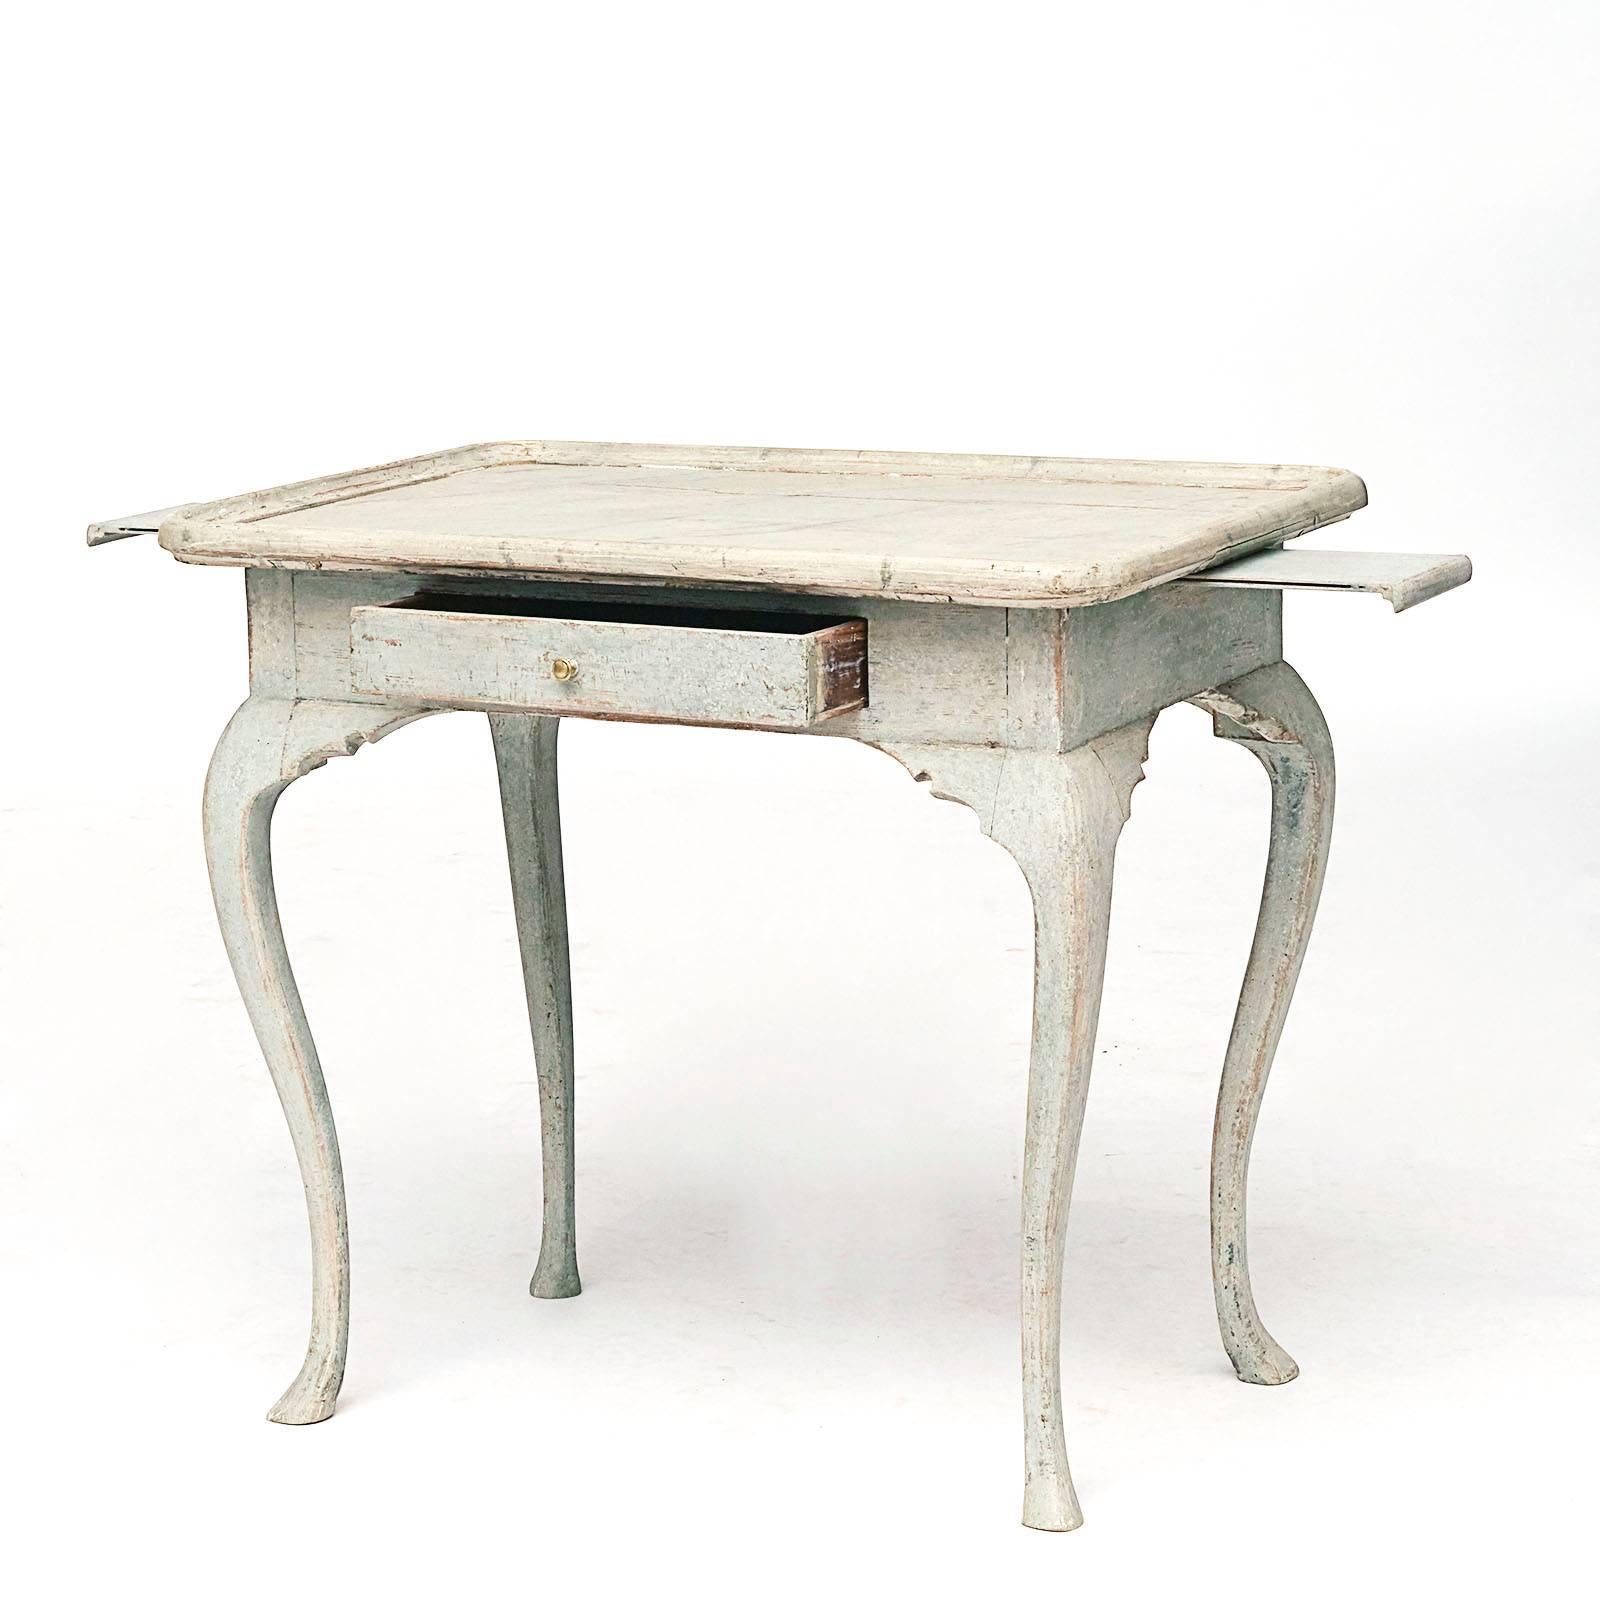 A Danish Rococo painted table, late 18th century, the grey marble painted rectangular top with curved corners and a molded edge above a plain frieze with a single drawer, pull-out candle supports the ends, raised on cabriole legs.